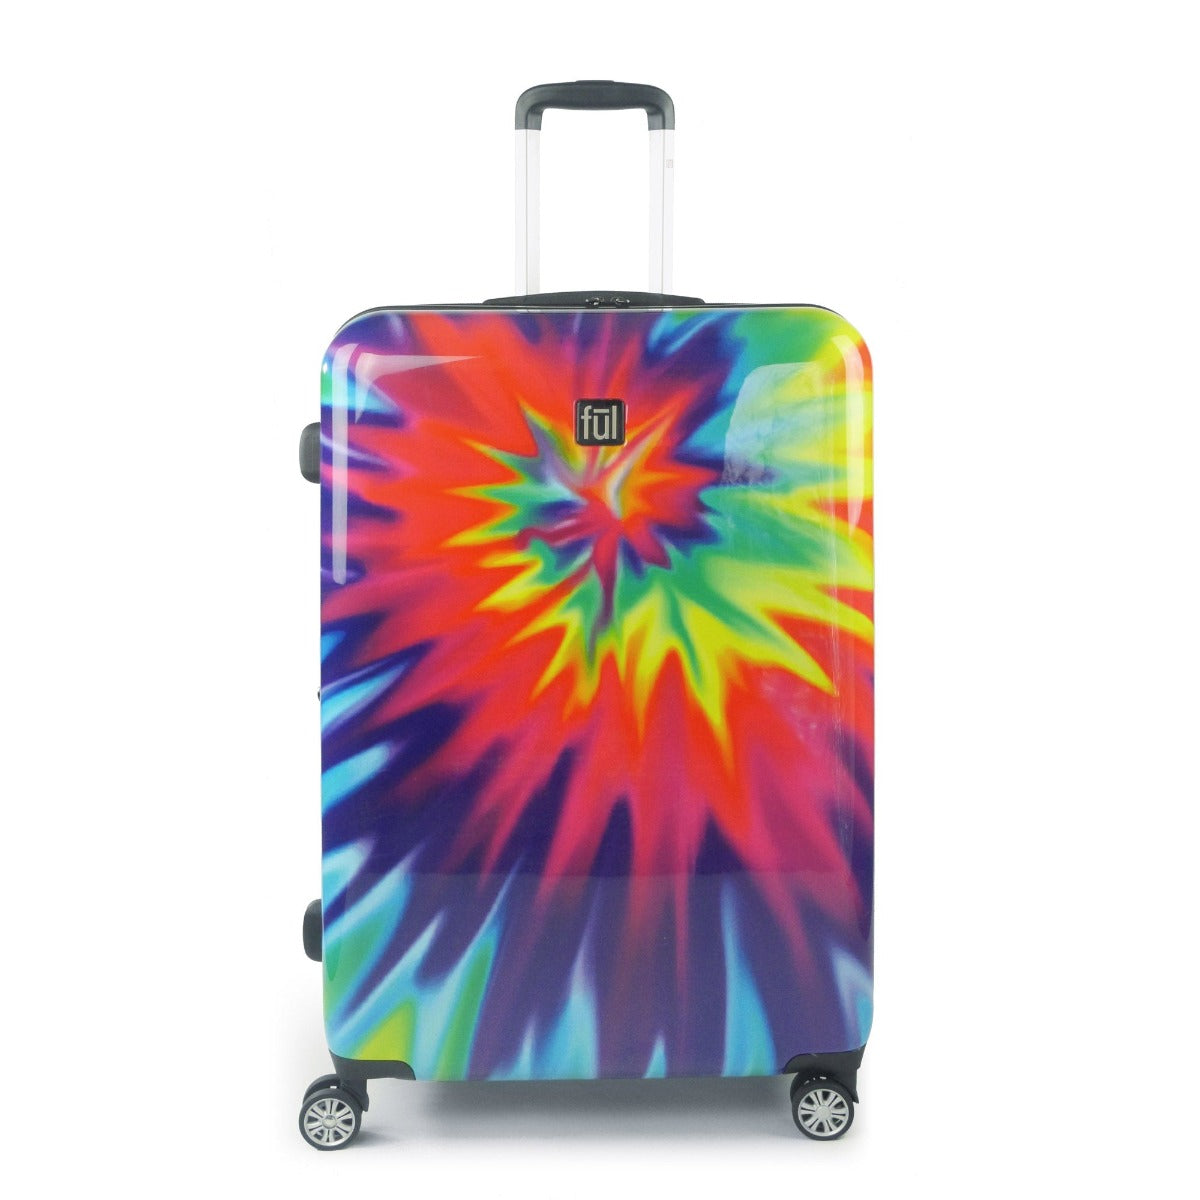 Ful Hard sided Tie dye rainbow swirl 28 inch spinner rolling suitcase checked luggage